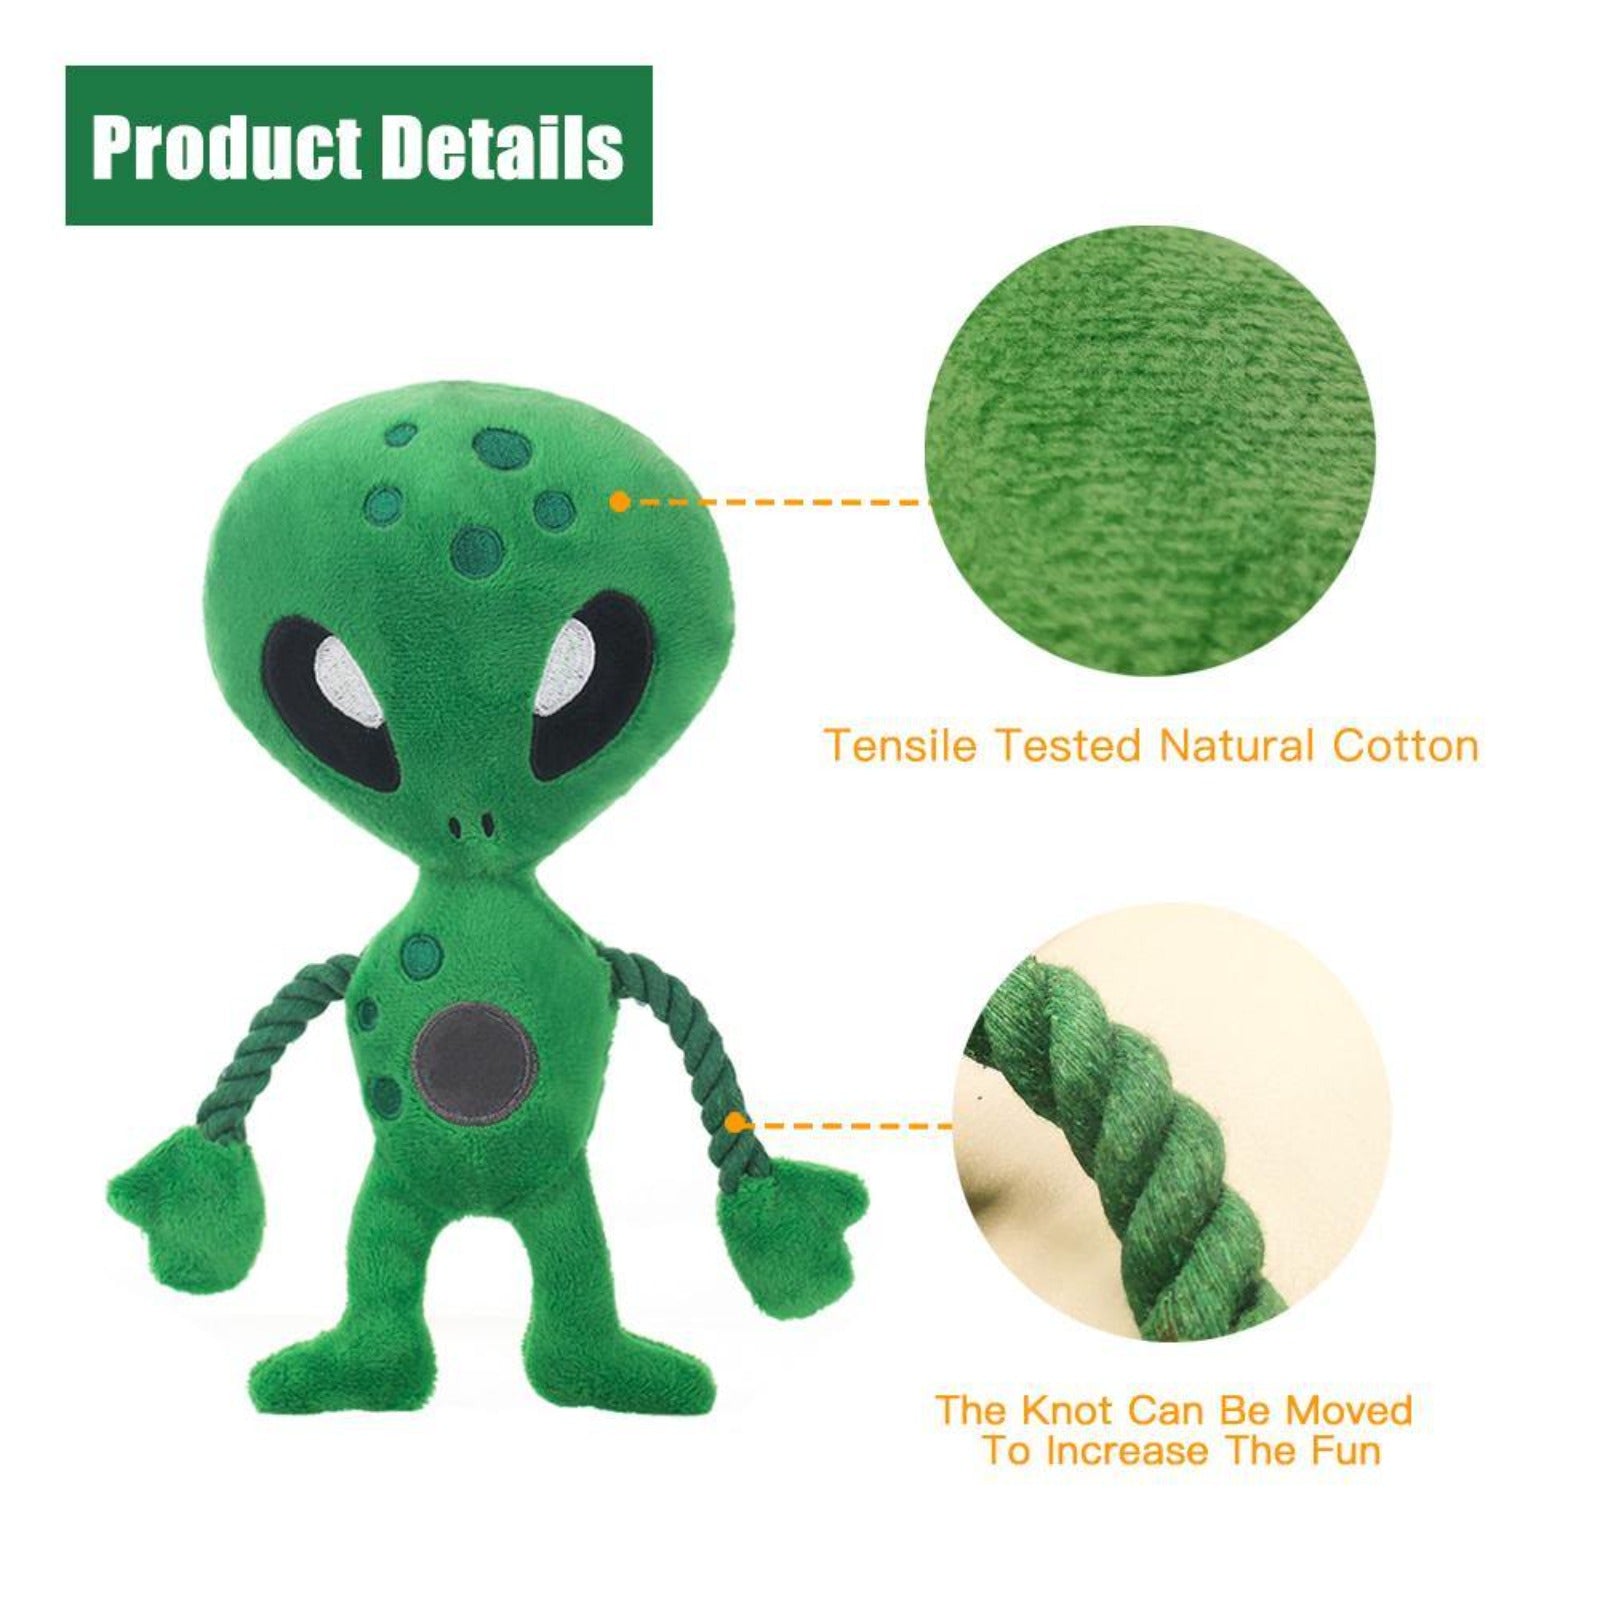 Laifug Squeaky Alien Toy